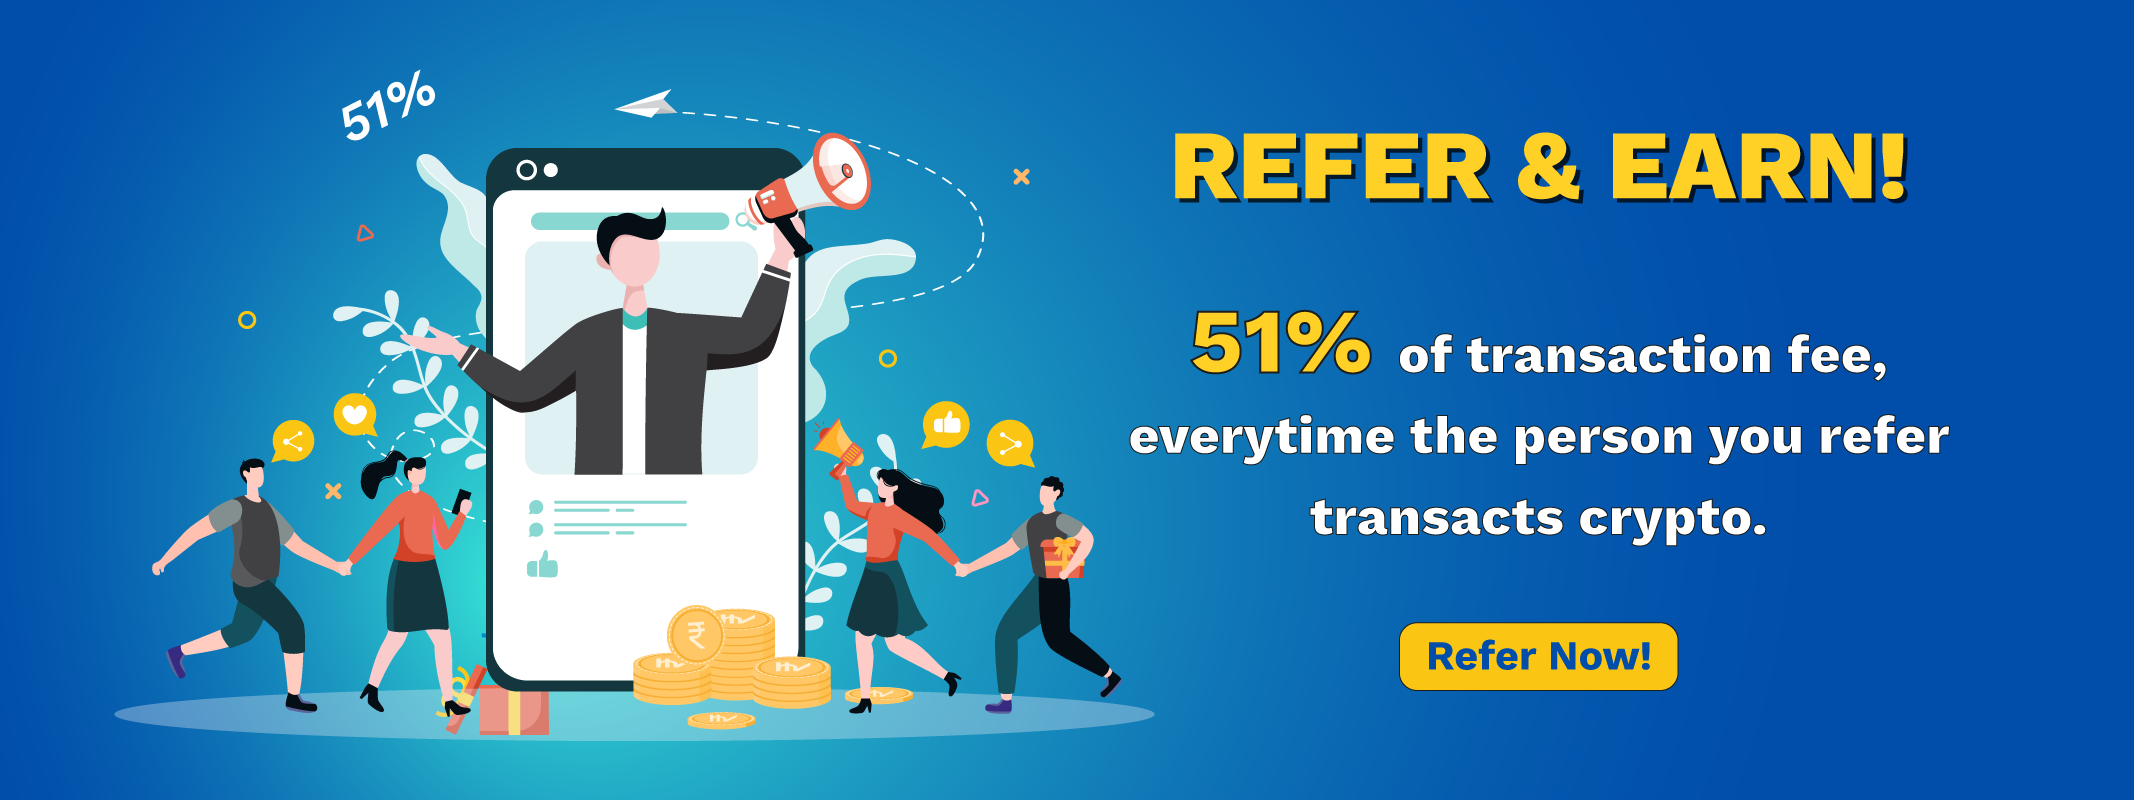 Refer and earn 51% in unocoin.